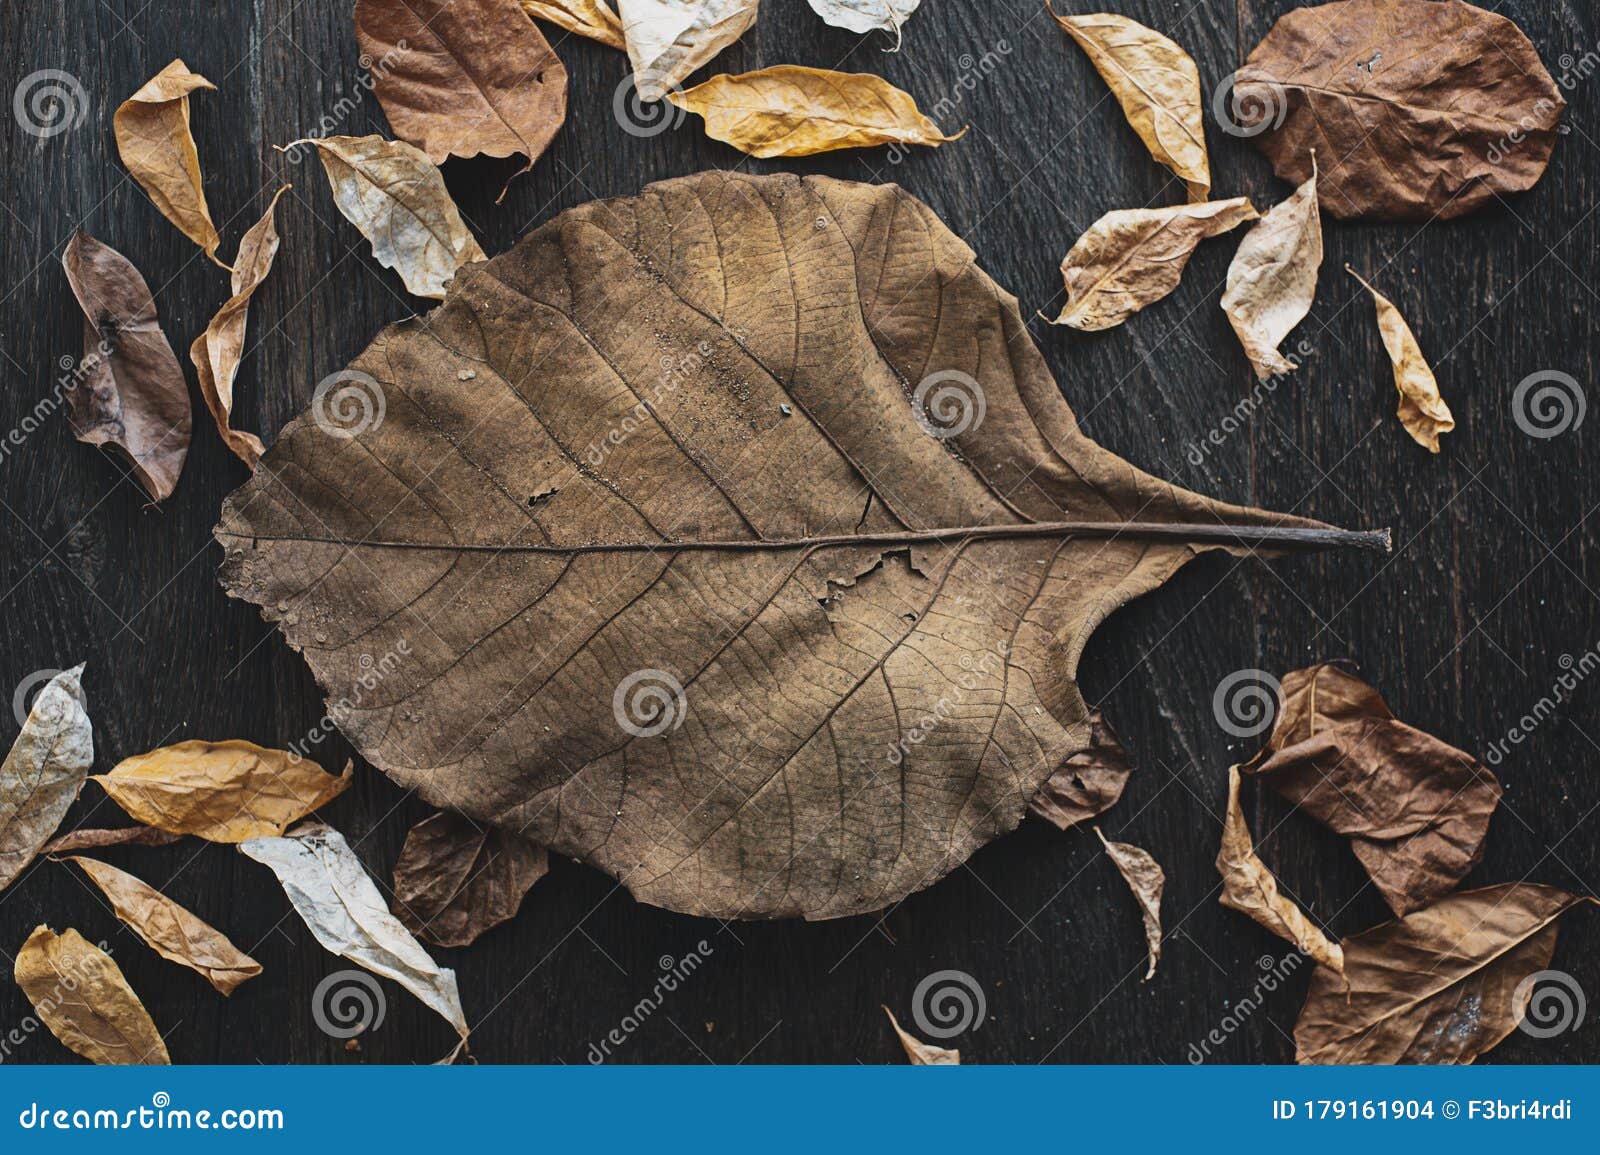 Dried Leaves Images  Free Download on Freepik